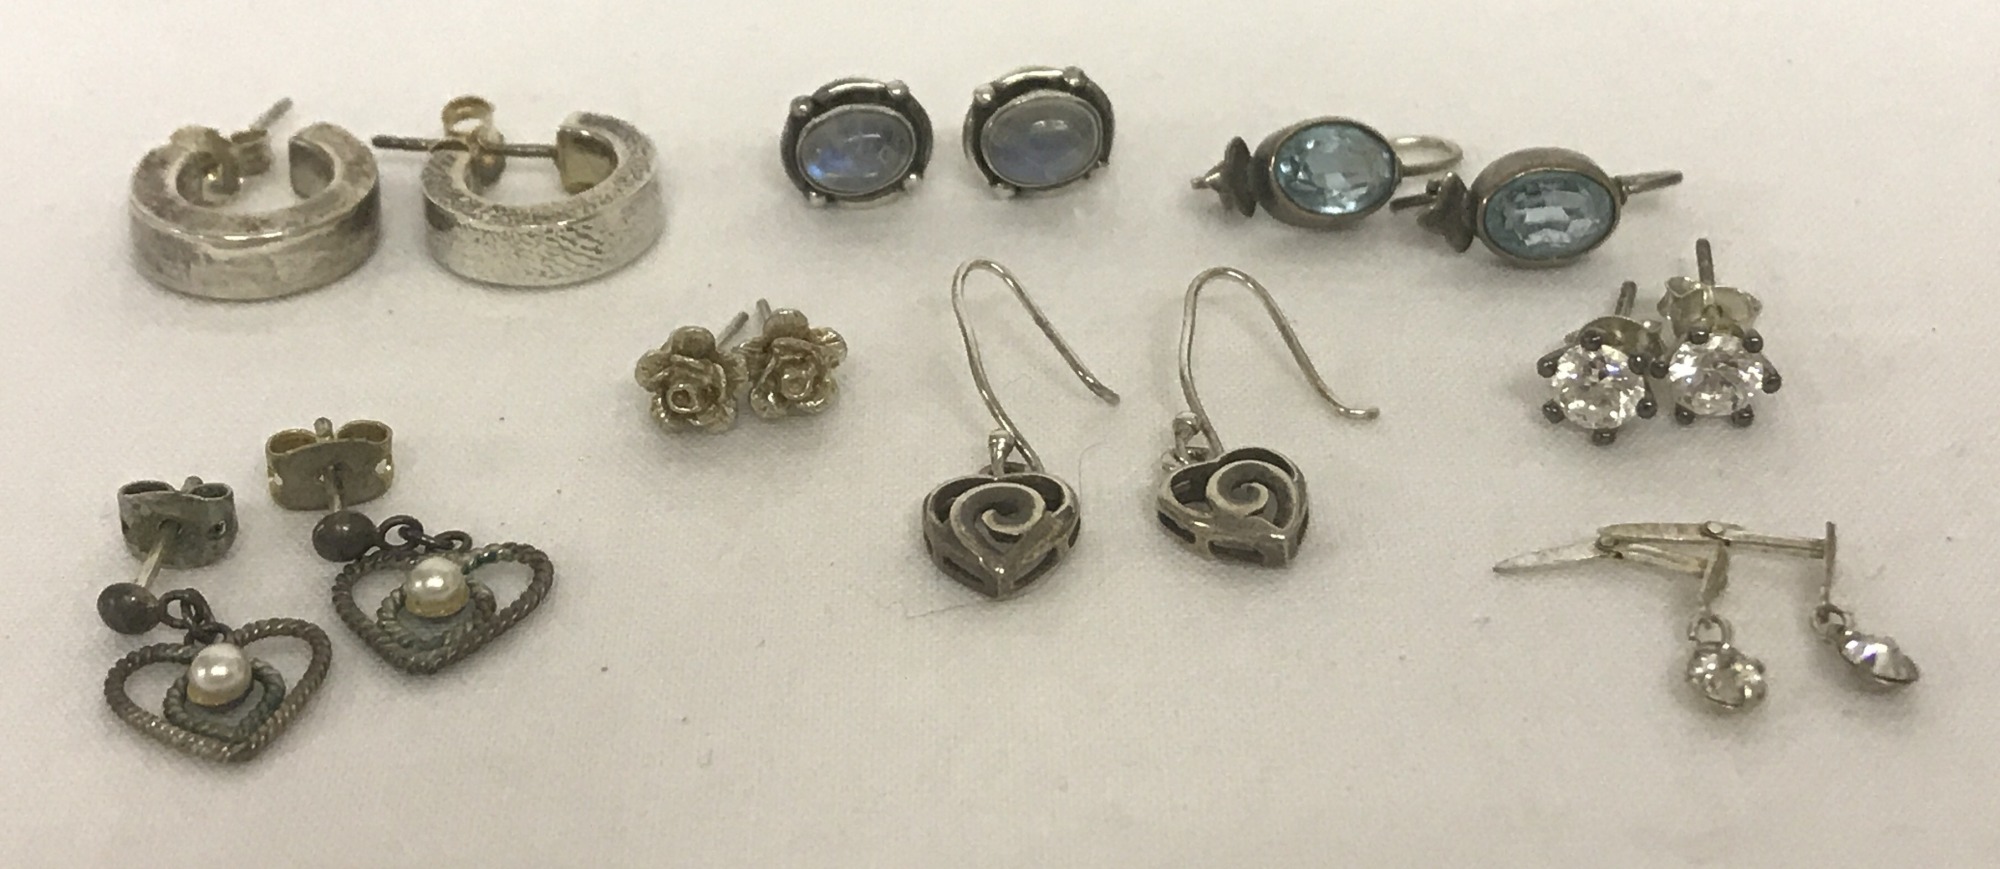 8 pairs of silver and white metal earrings to include stud style, hoops and drops.